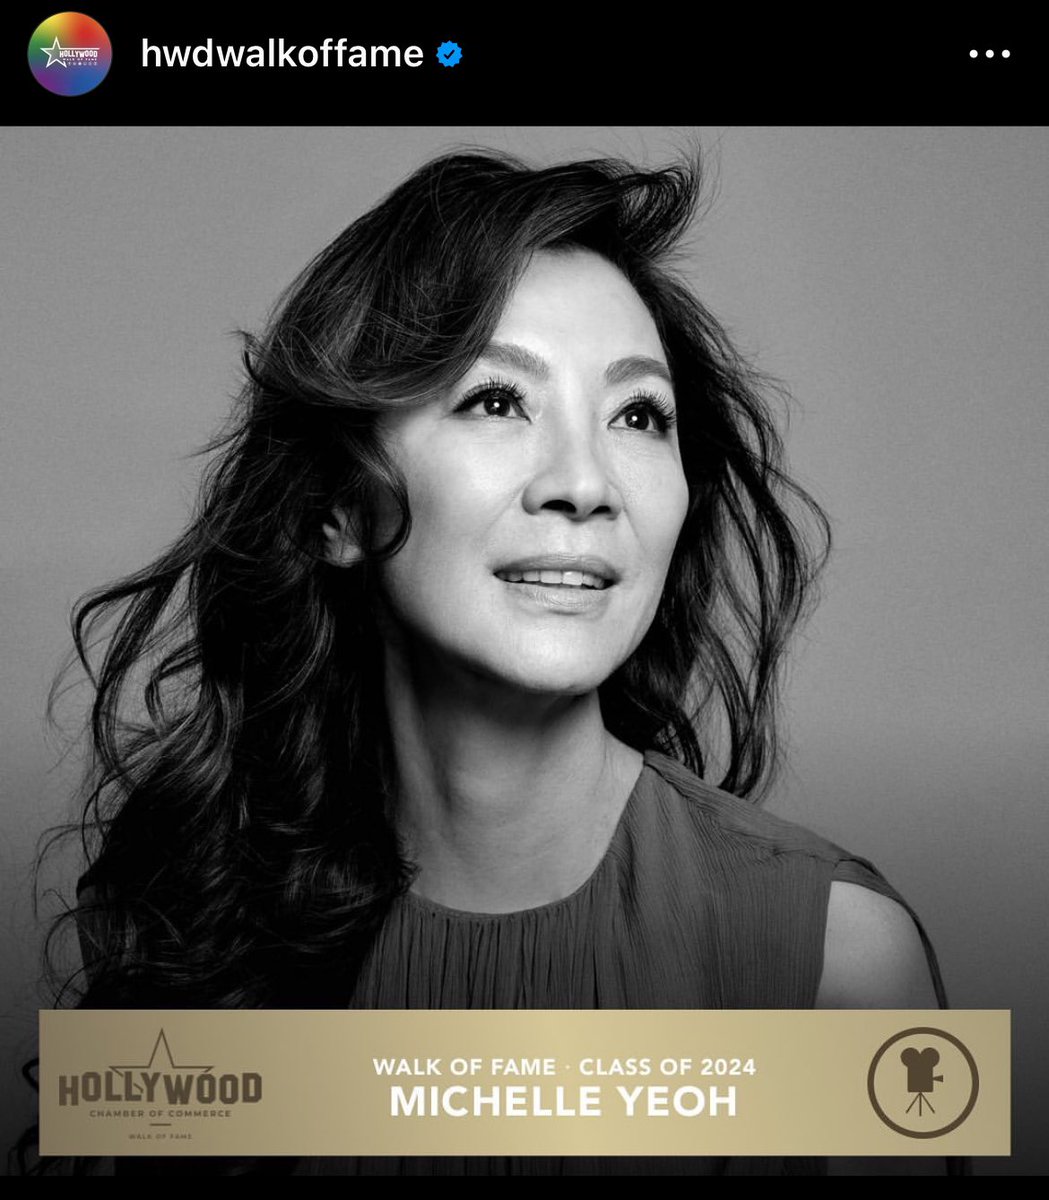 Michelle is FINALLY getting her long overdue recognition!! So proud of her! ♥️♥️♥️♥️ #HollywoodWalkOfFame #WalkOfFame #MichelleYeoh